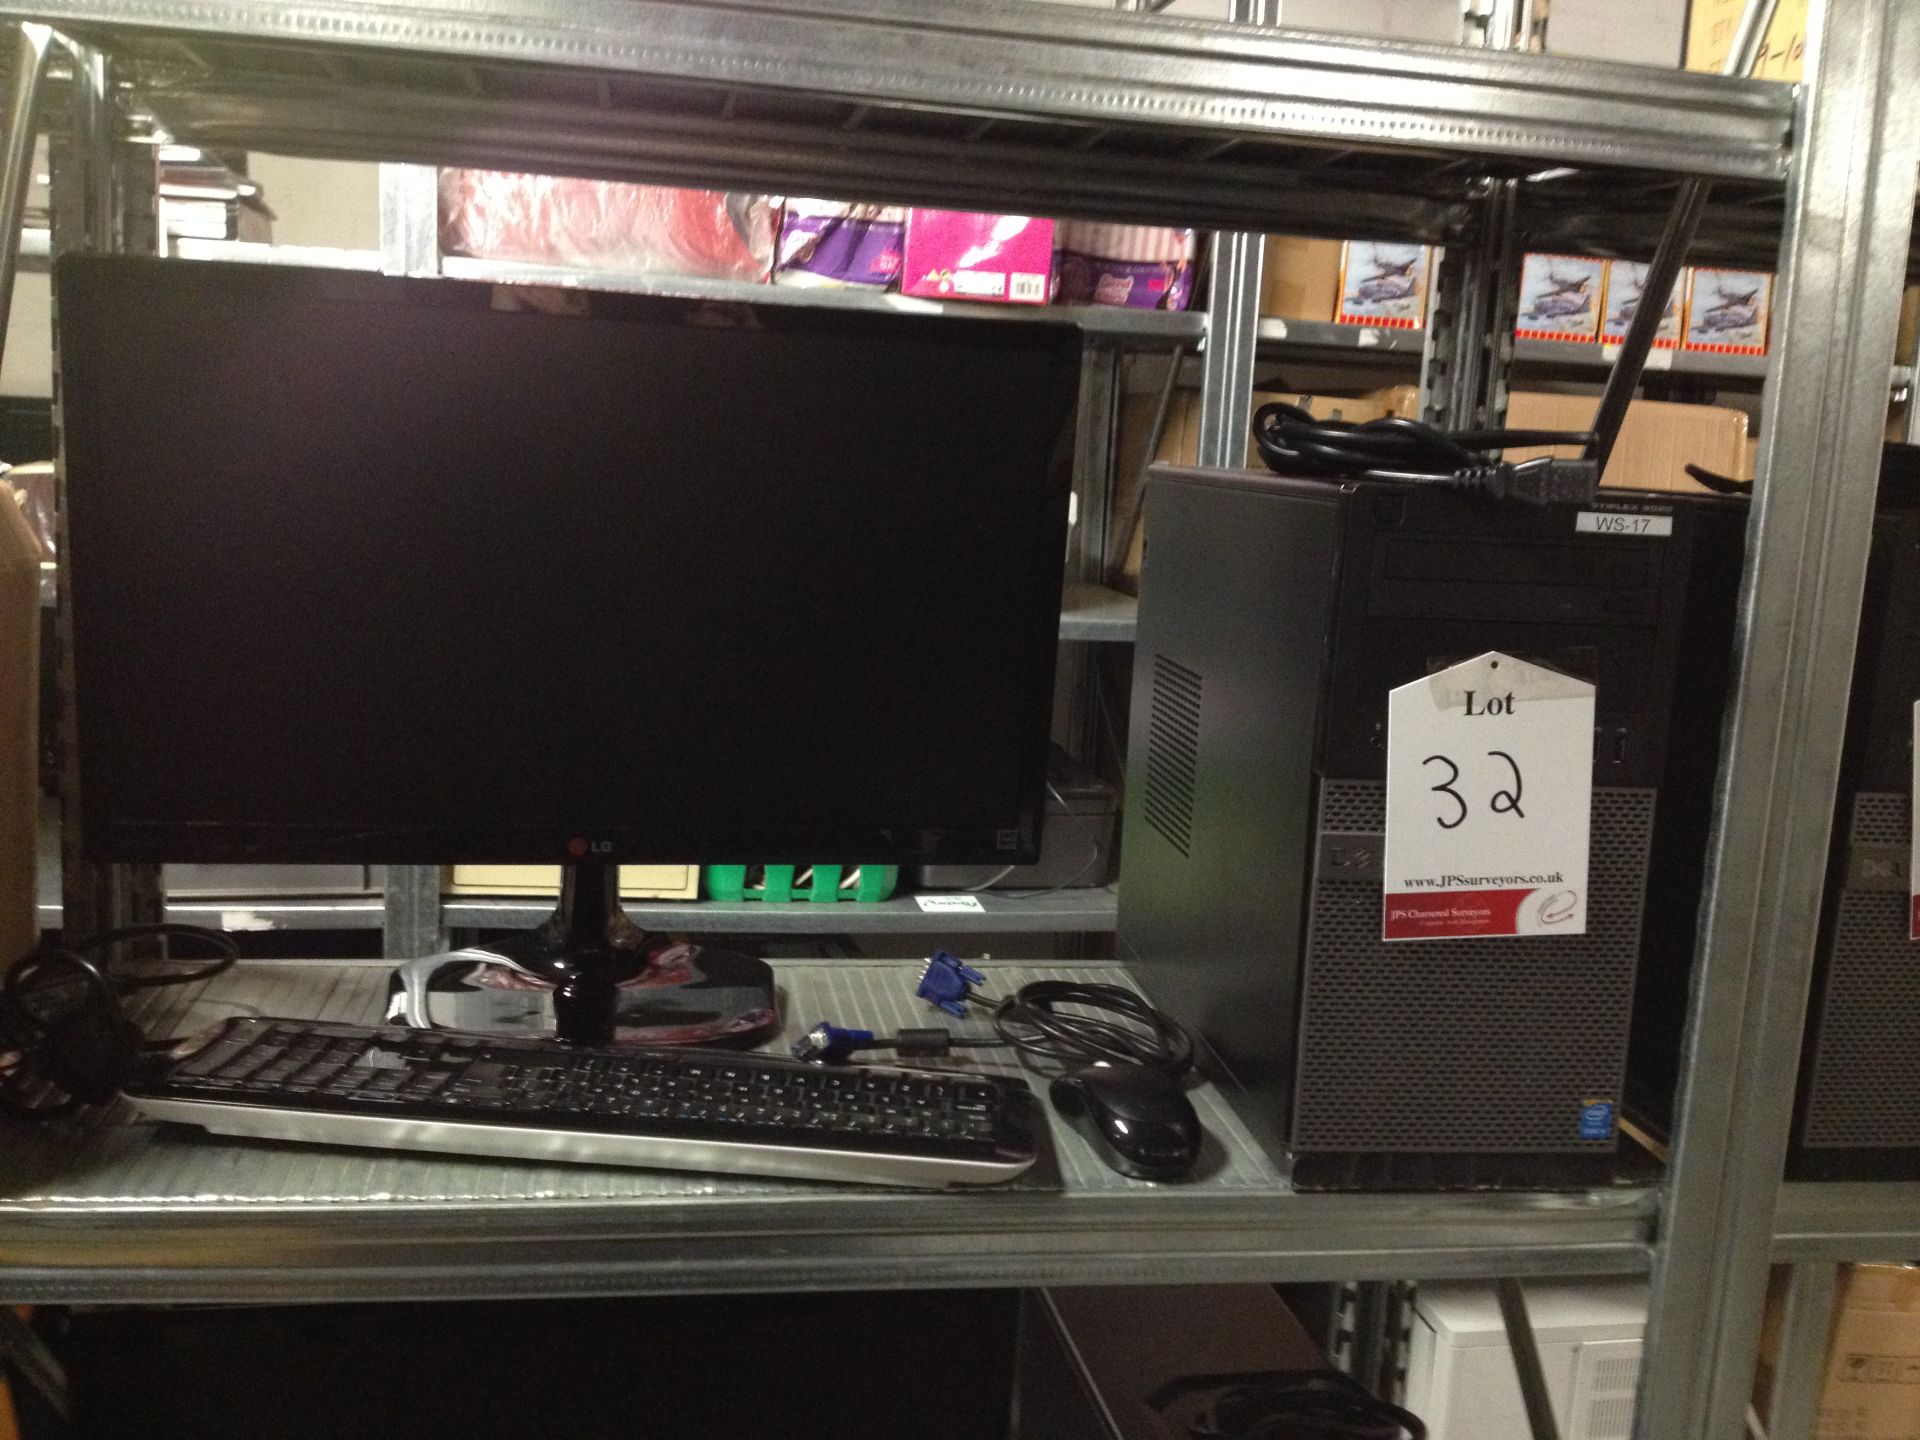 Dell desktop PC Model: D15M Optiplex3020 with monitor, keyboard and mouse